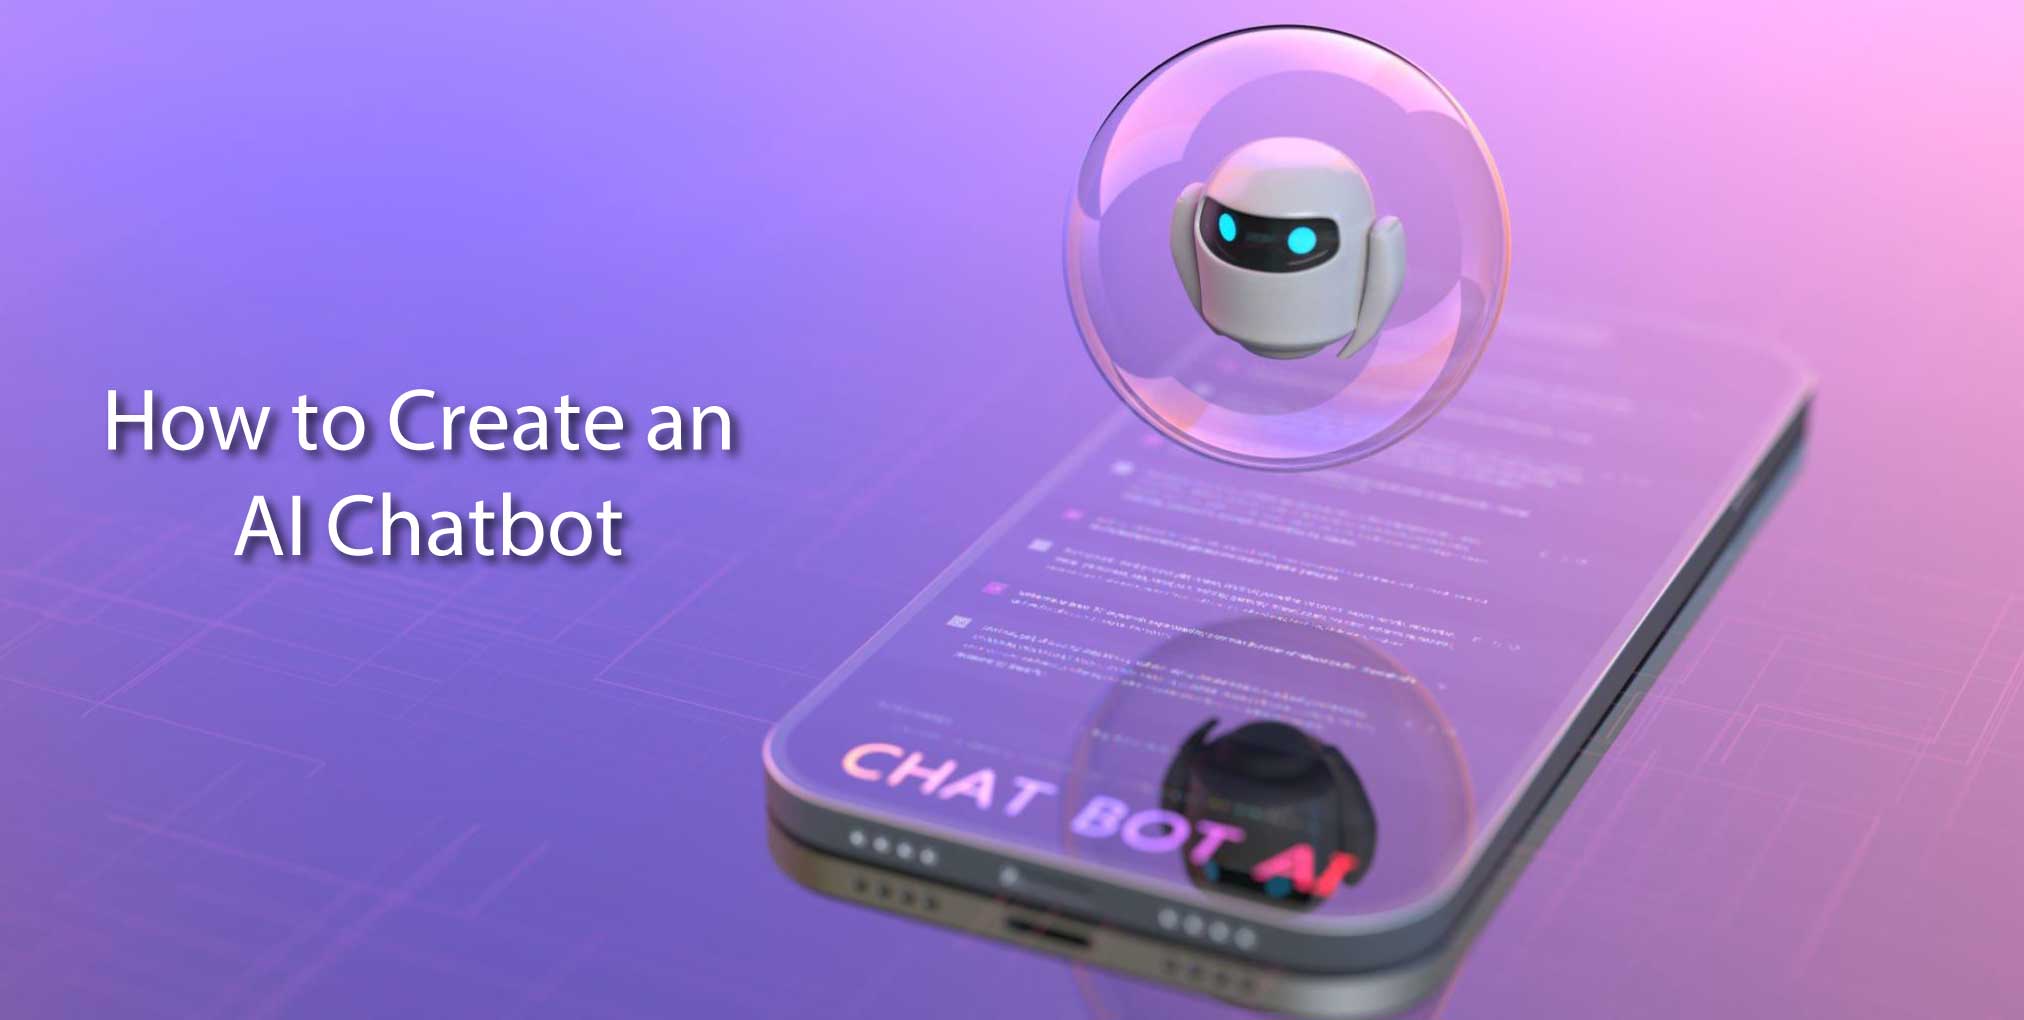 How to Create an AI Chatbot